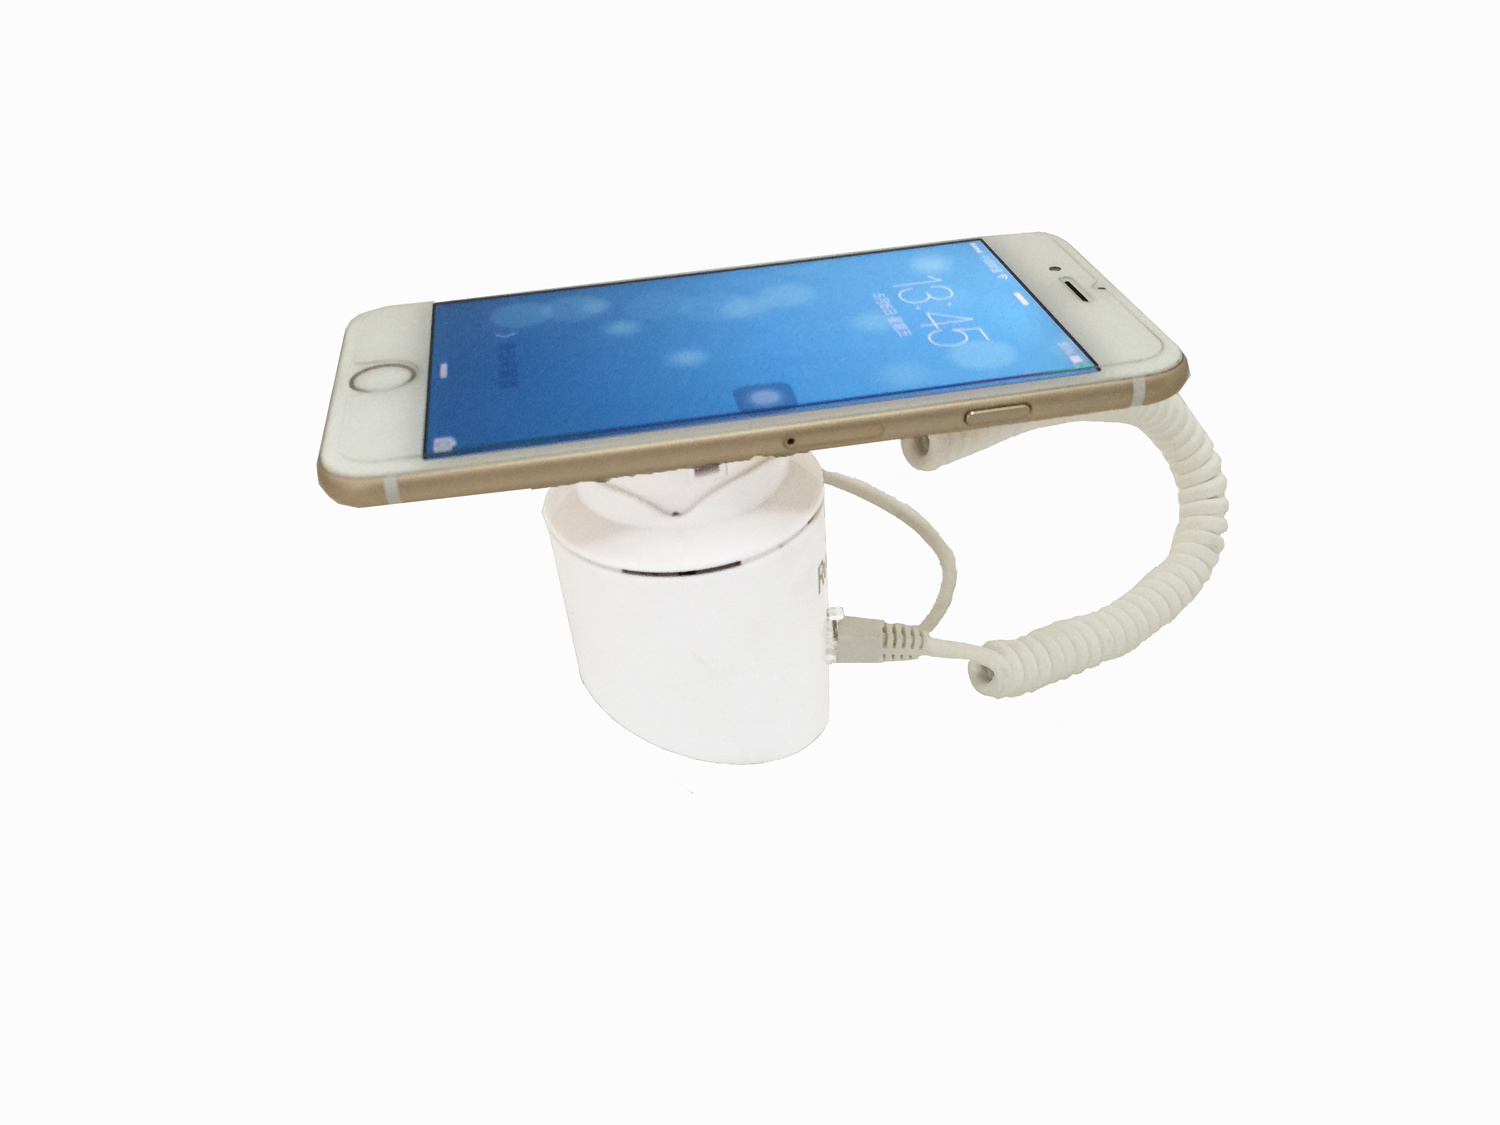 Rotating Mobile Phone Display Stand for Smart Phone